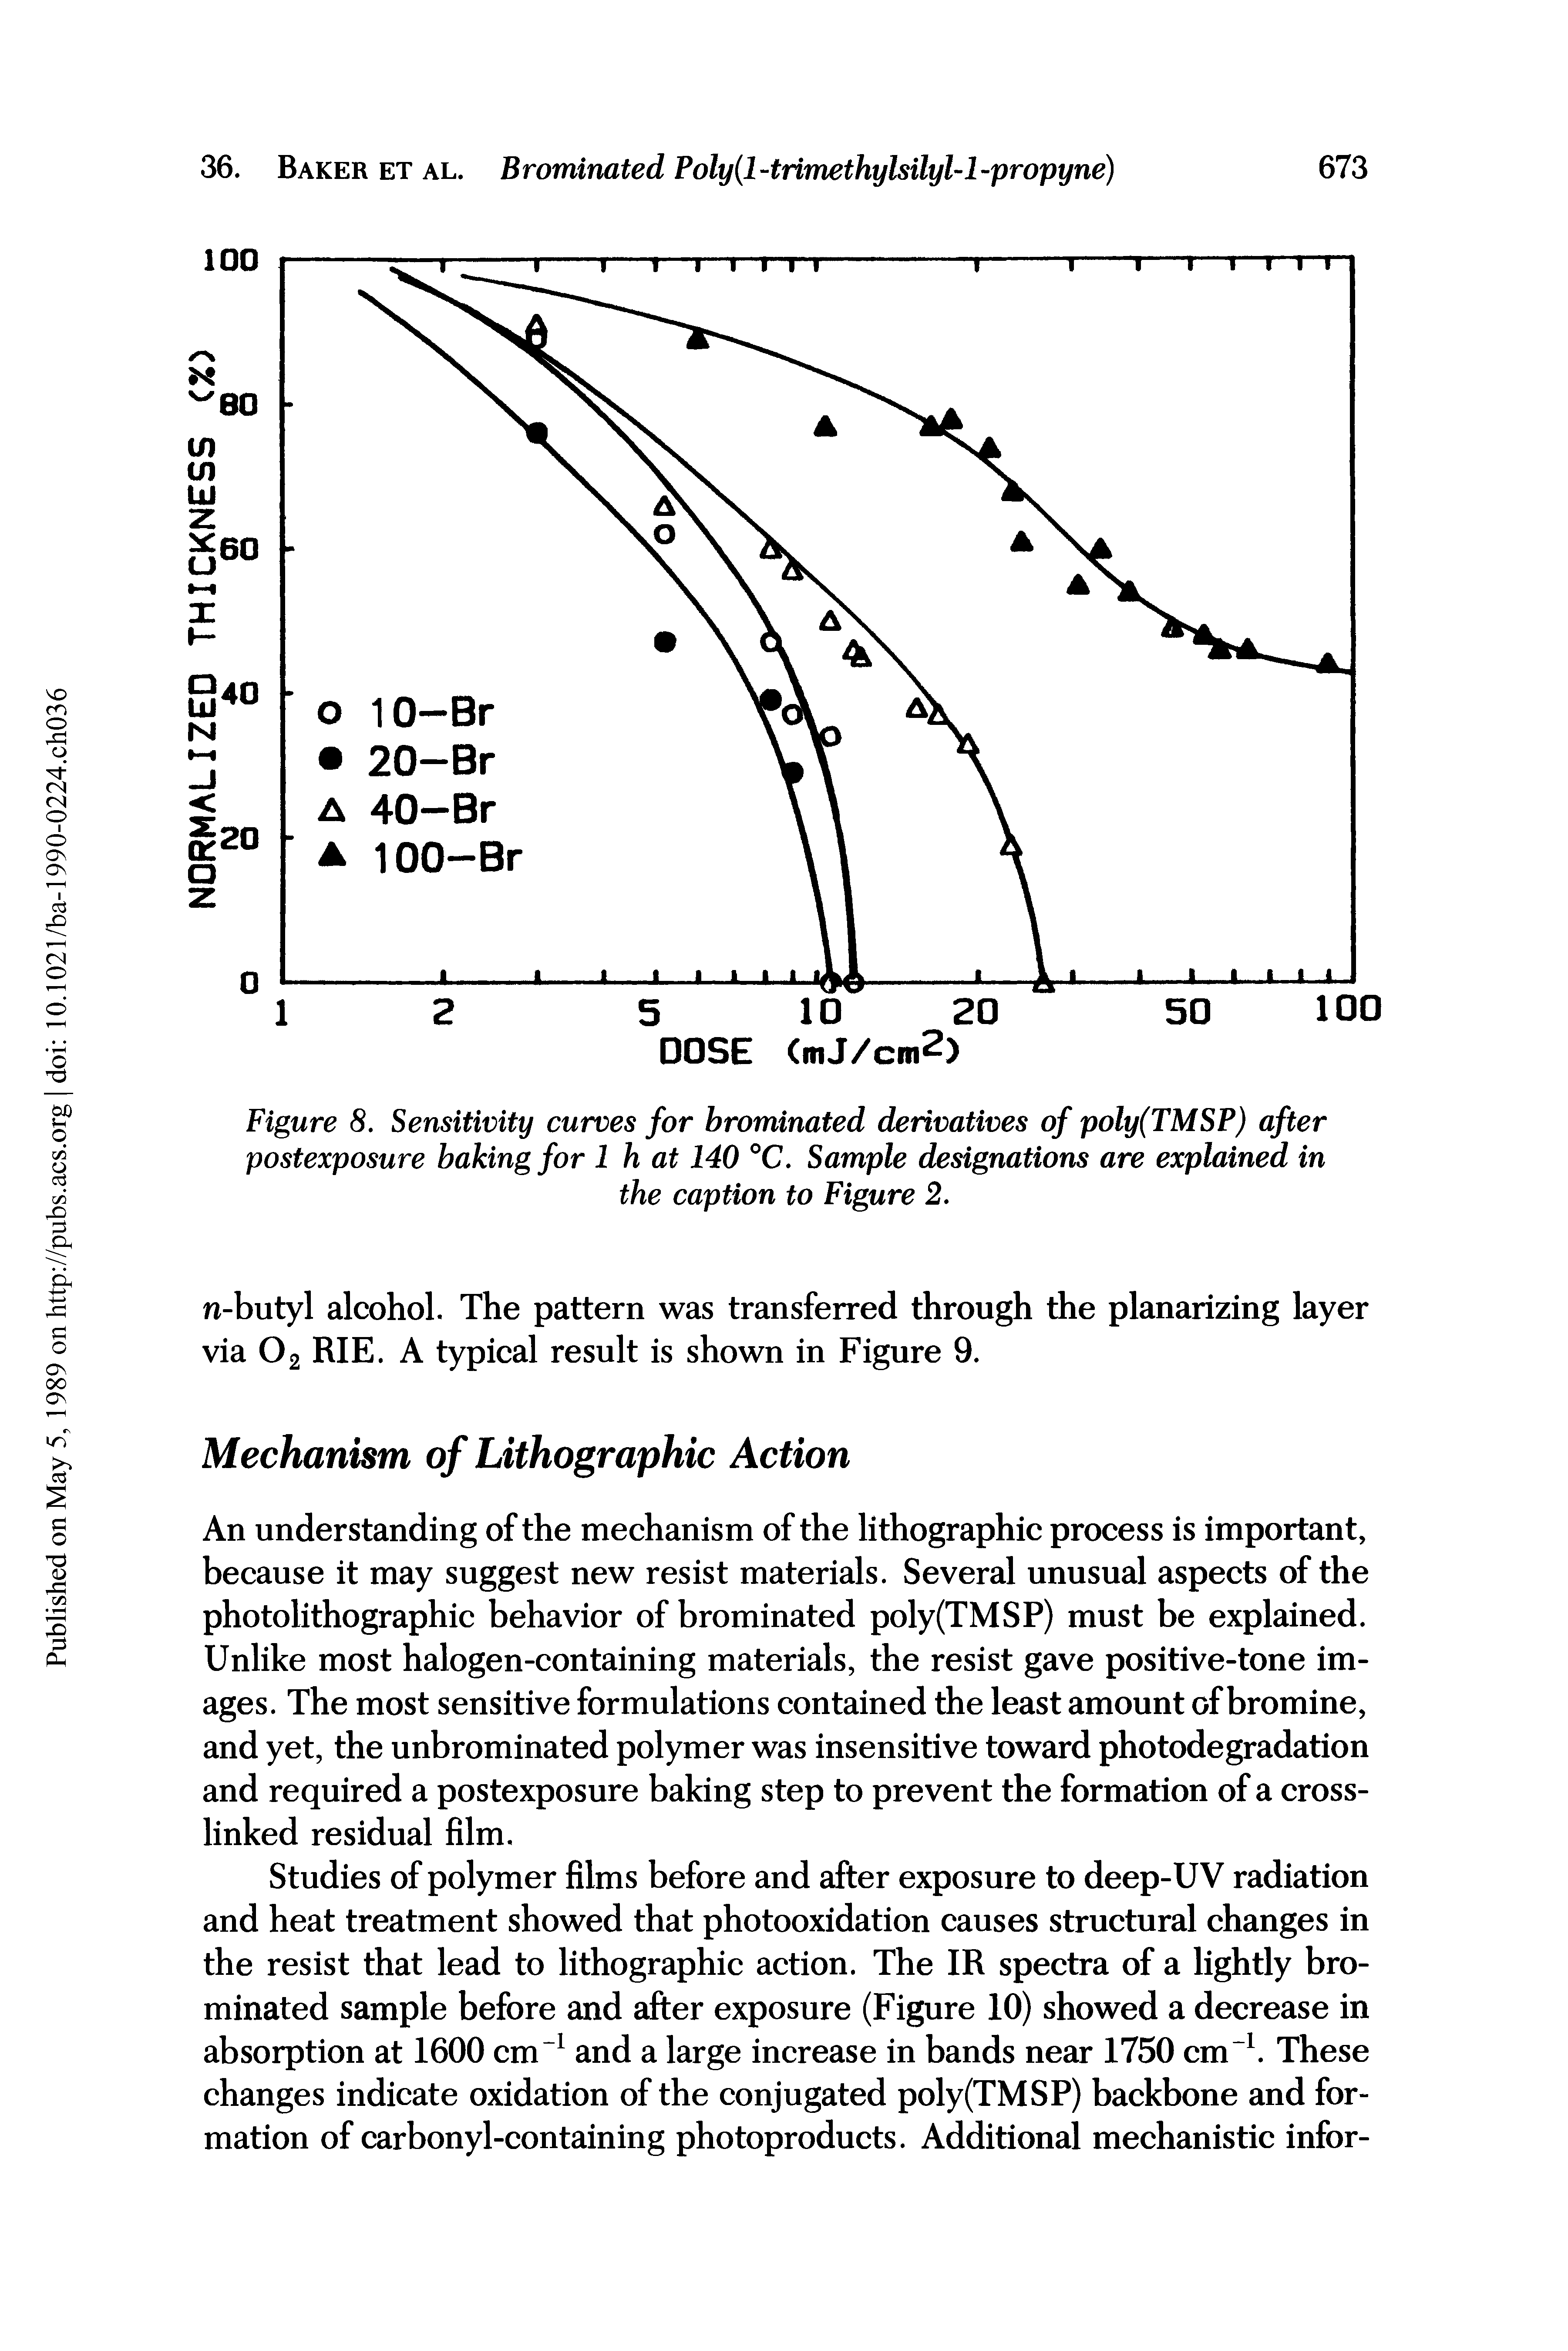 Figure 8. Sensitivity curves for brominated derivatives of poly(TMSP) after postexposure baking for 1 h at 140 °C. Sample designations are explained in the caption to Figure 2.